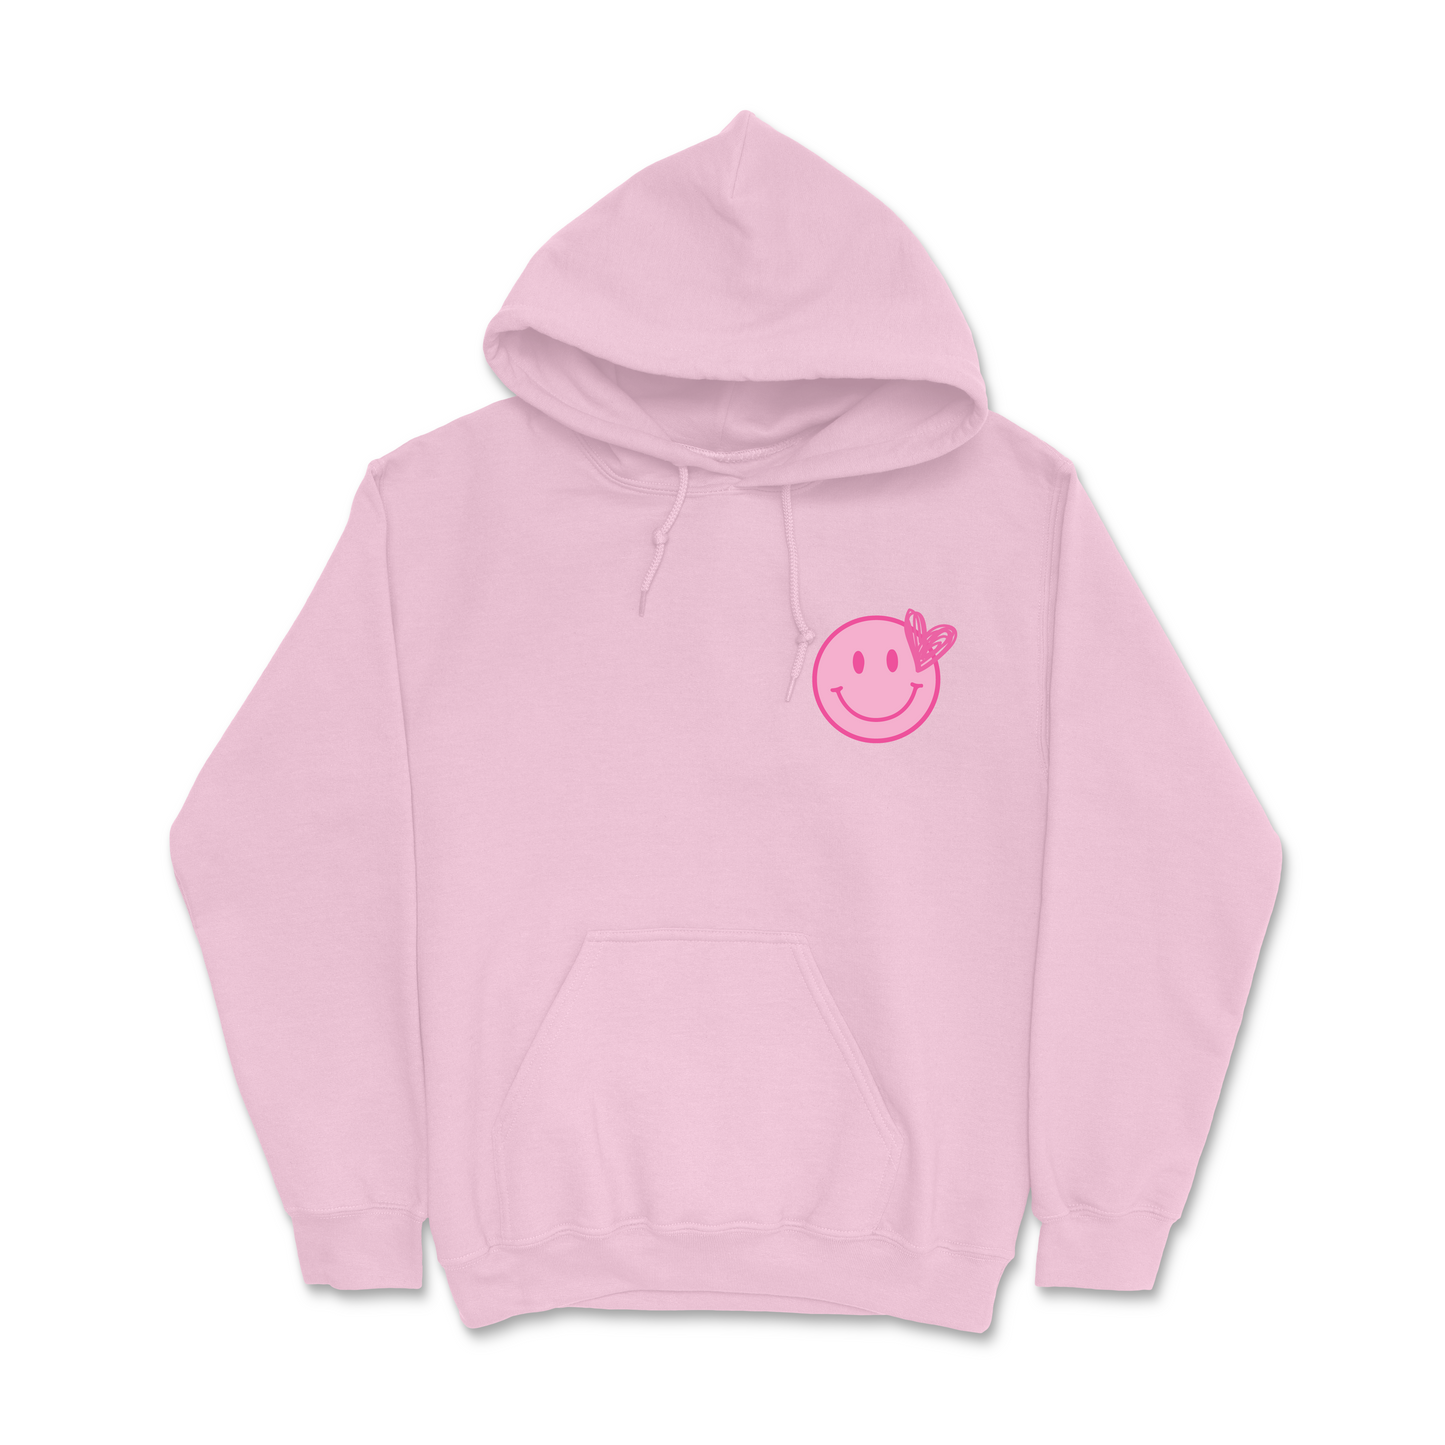 XOXO HOODIE <br> More colors available